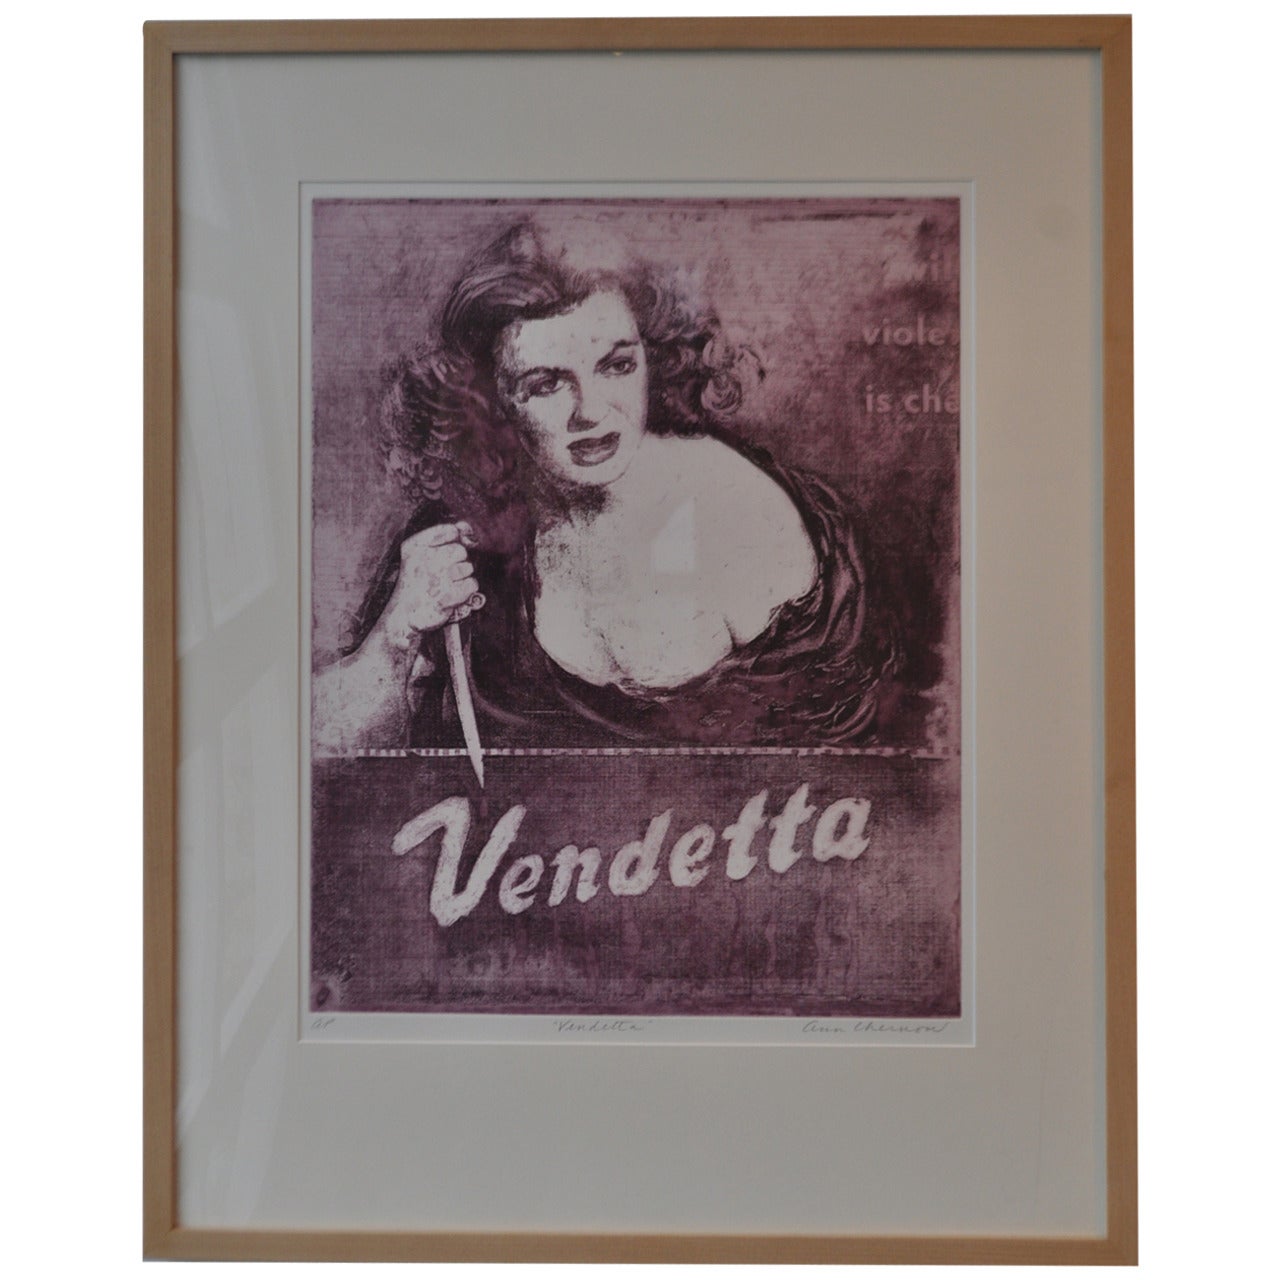 Ann Chernow "Vendetta" Etching, Aquatint, and Photogravure For Sale